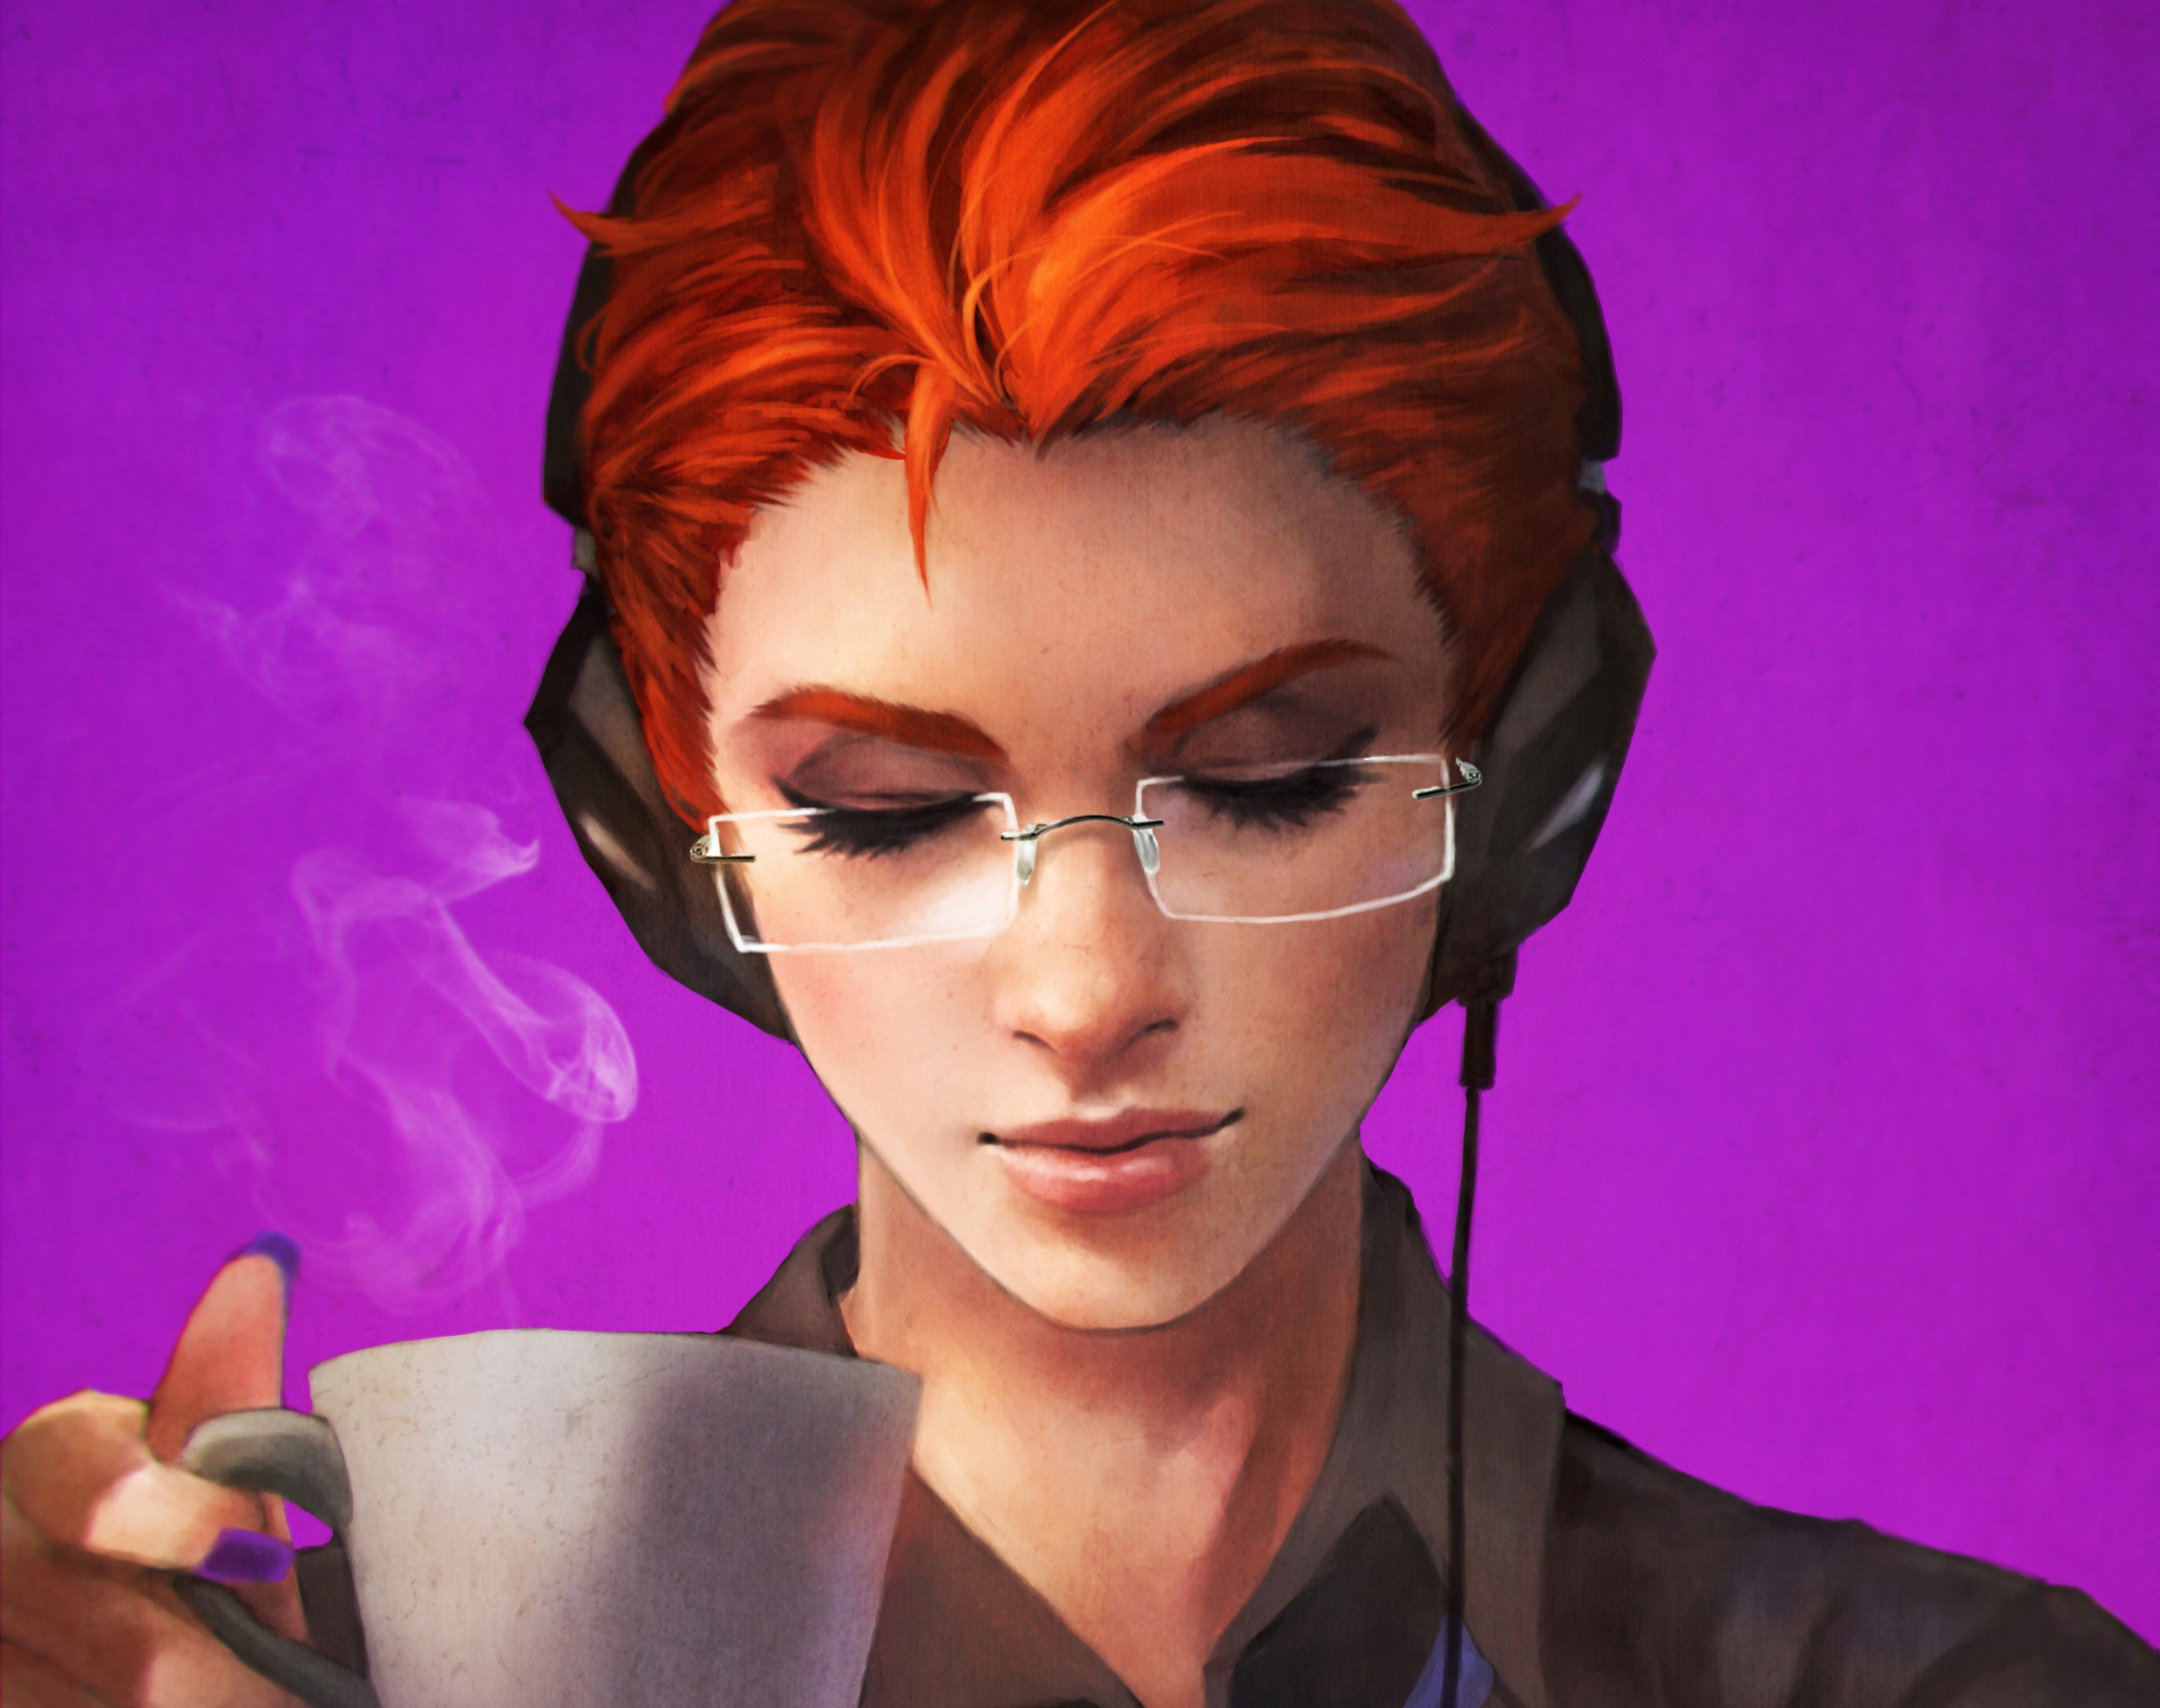 video game, overwatch, cup, face, glasses, moira (overwatch), red hair Full HD